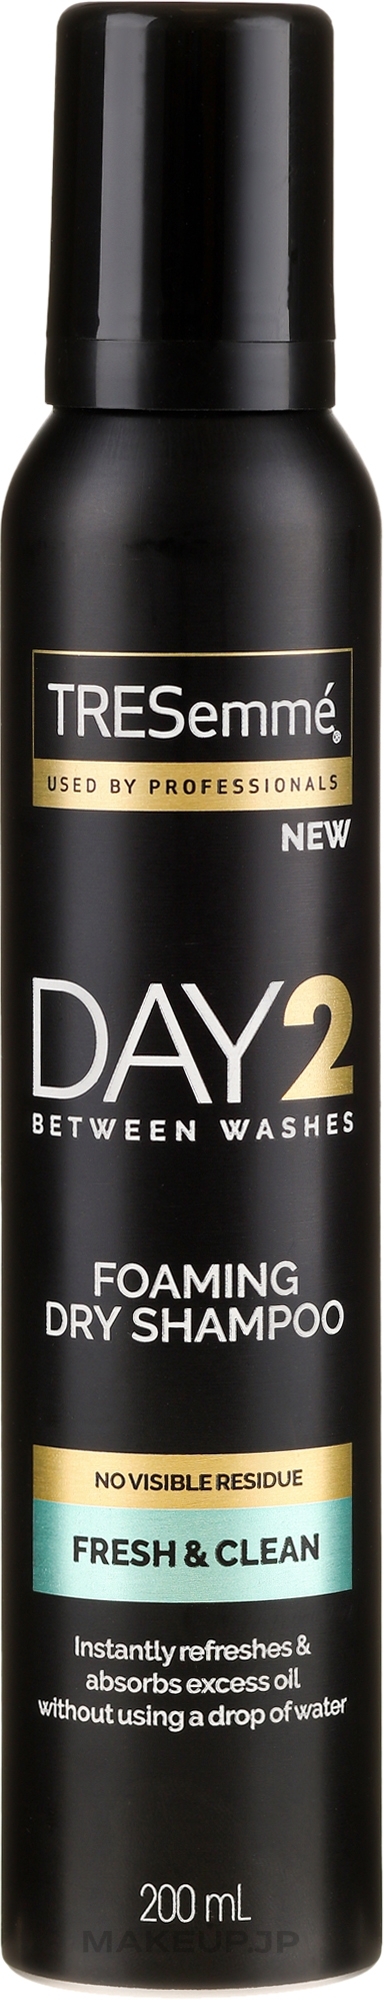 Dry Shampoo for Normal & Thick Hair - Tresemme Day 2 Fresh & Clean Foaming Dry Shampoo — photo 200 ml